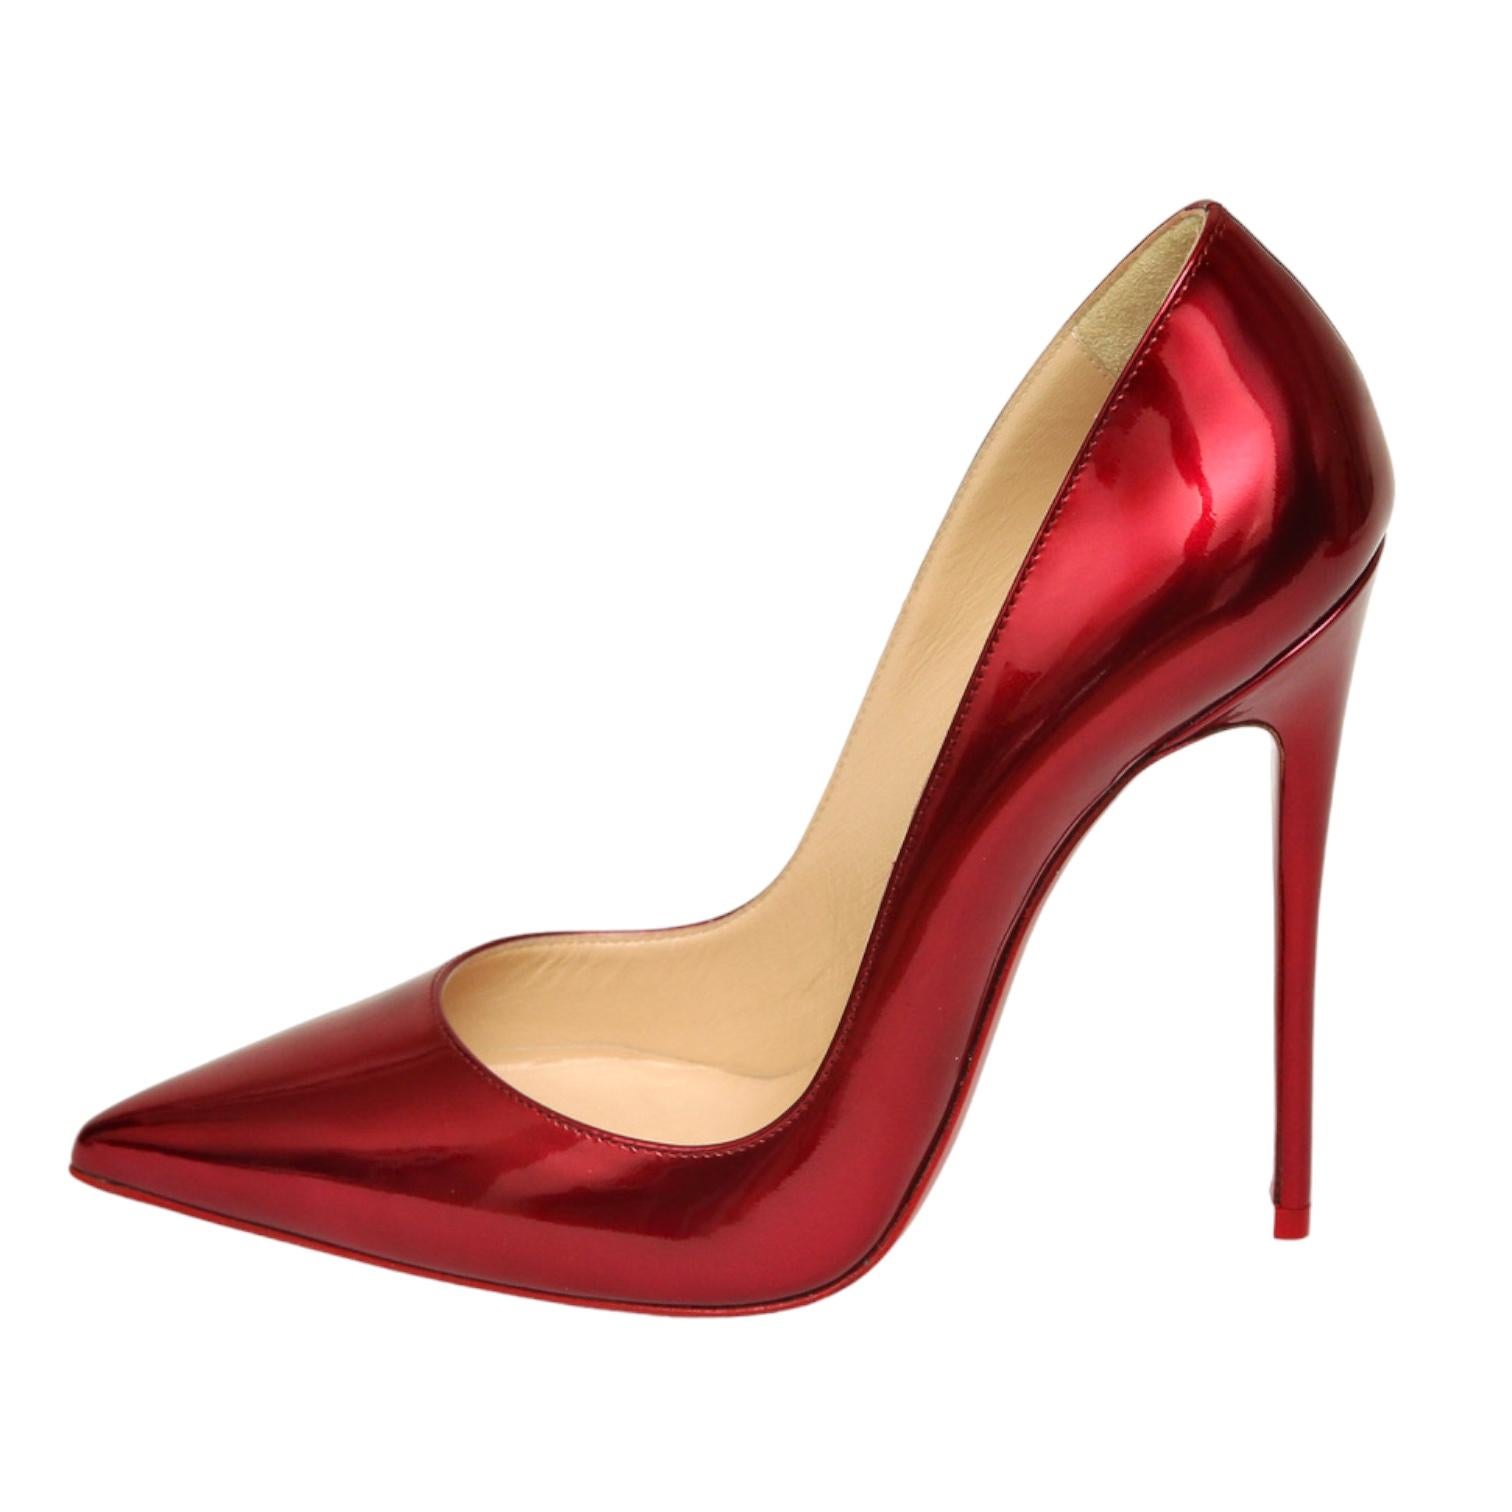 Women's CHRISTIAN LOUBOUTIN So Kate 120 Red Patent Leather Pump Pointed Toe 38